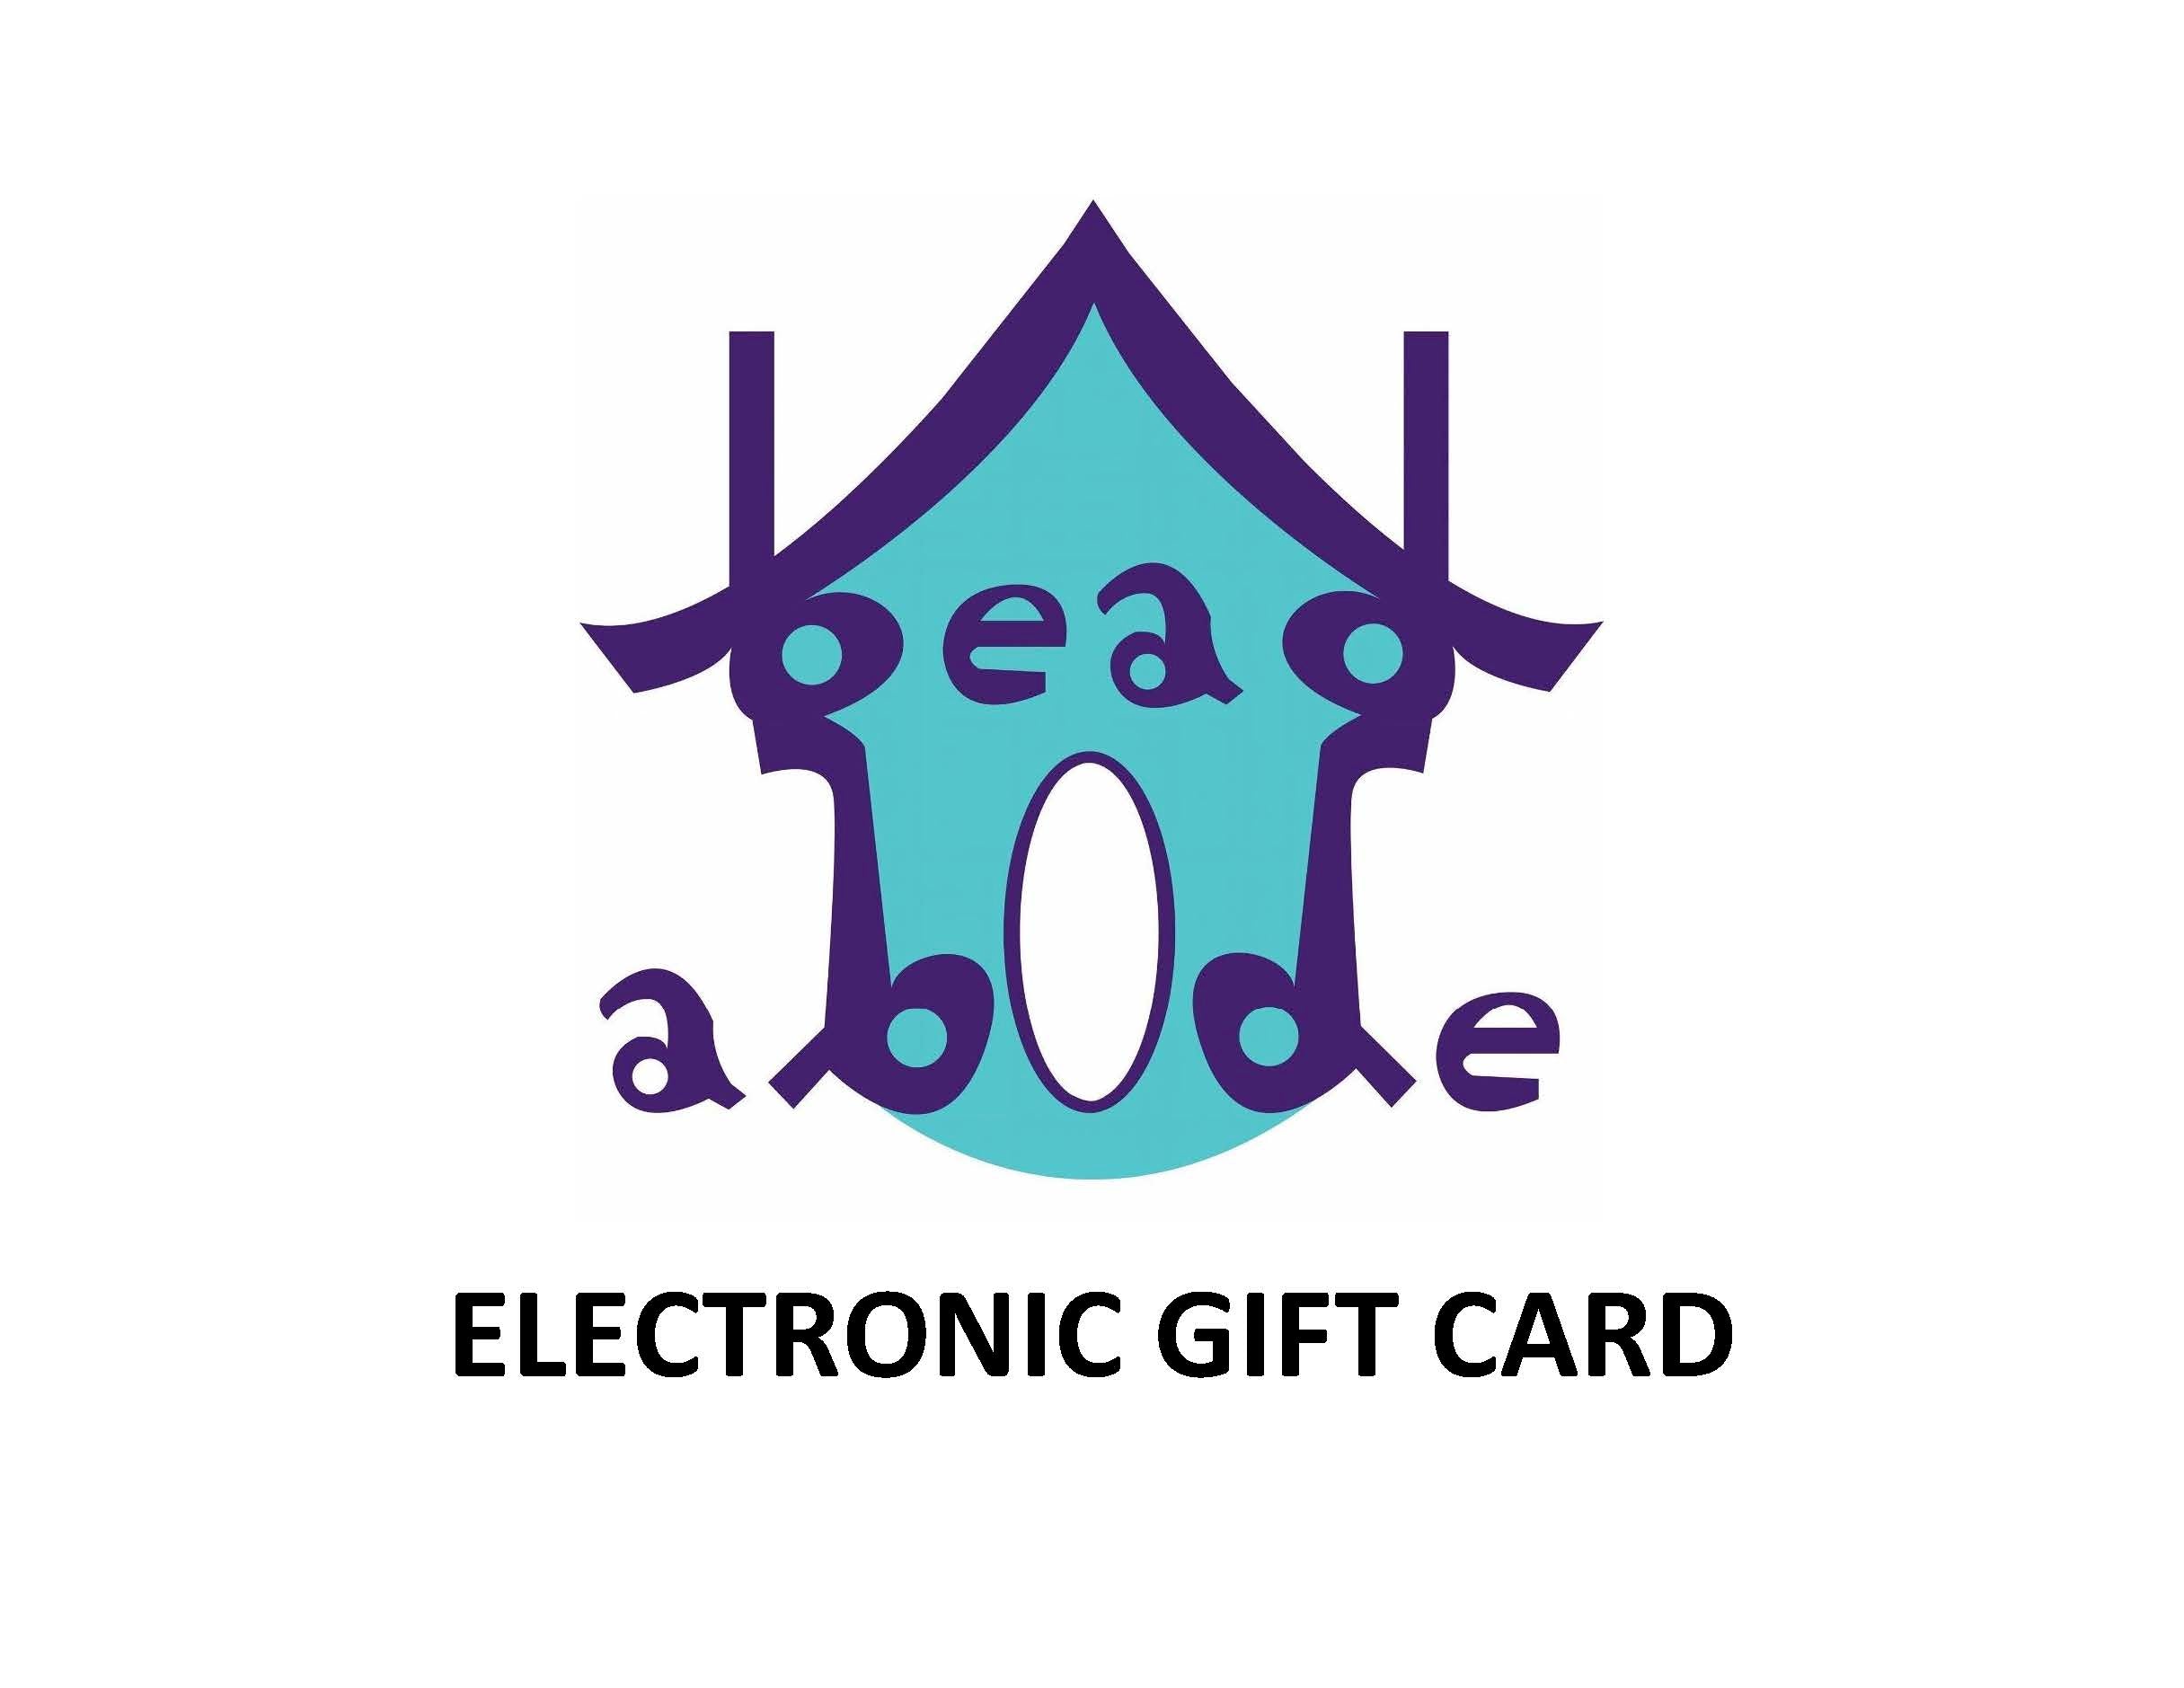 Bead Abode Electronic Gift Card